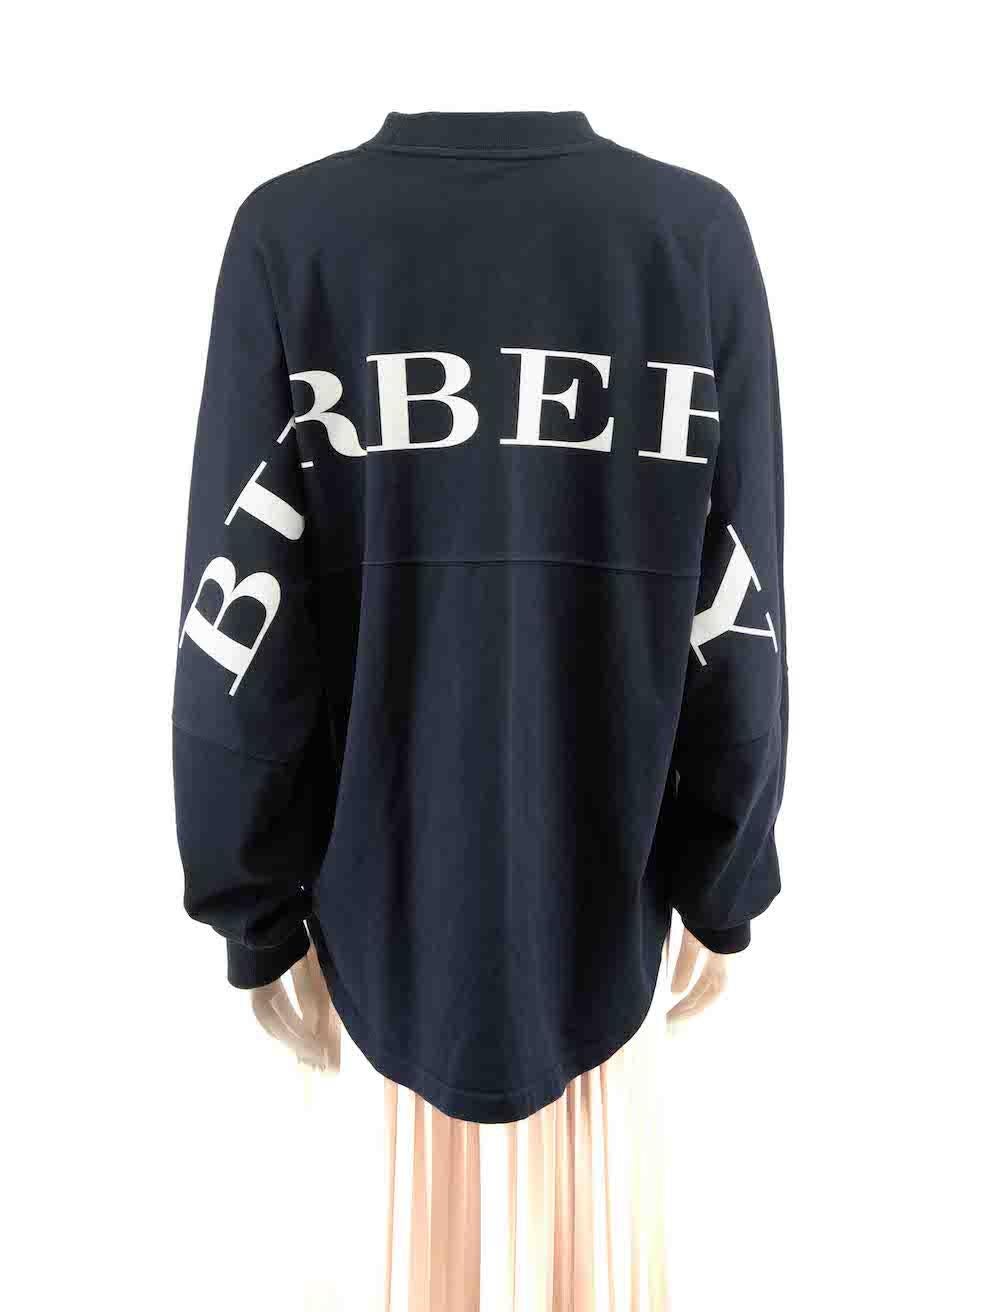 Burberry Navy Logo Long Sleeves Sweatshirt Size XL In Good Condition For Sale In London, GB